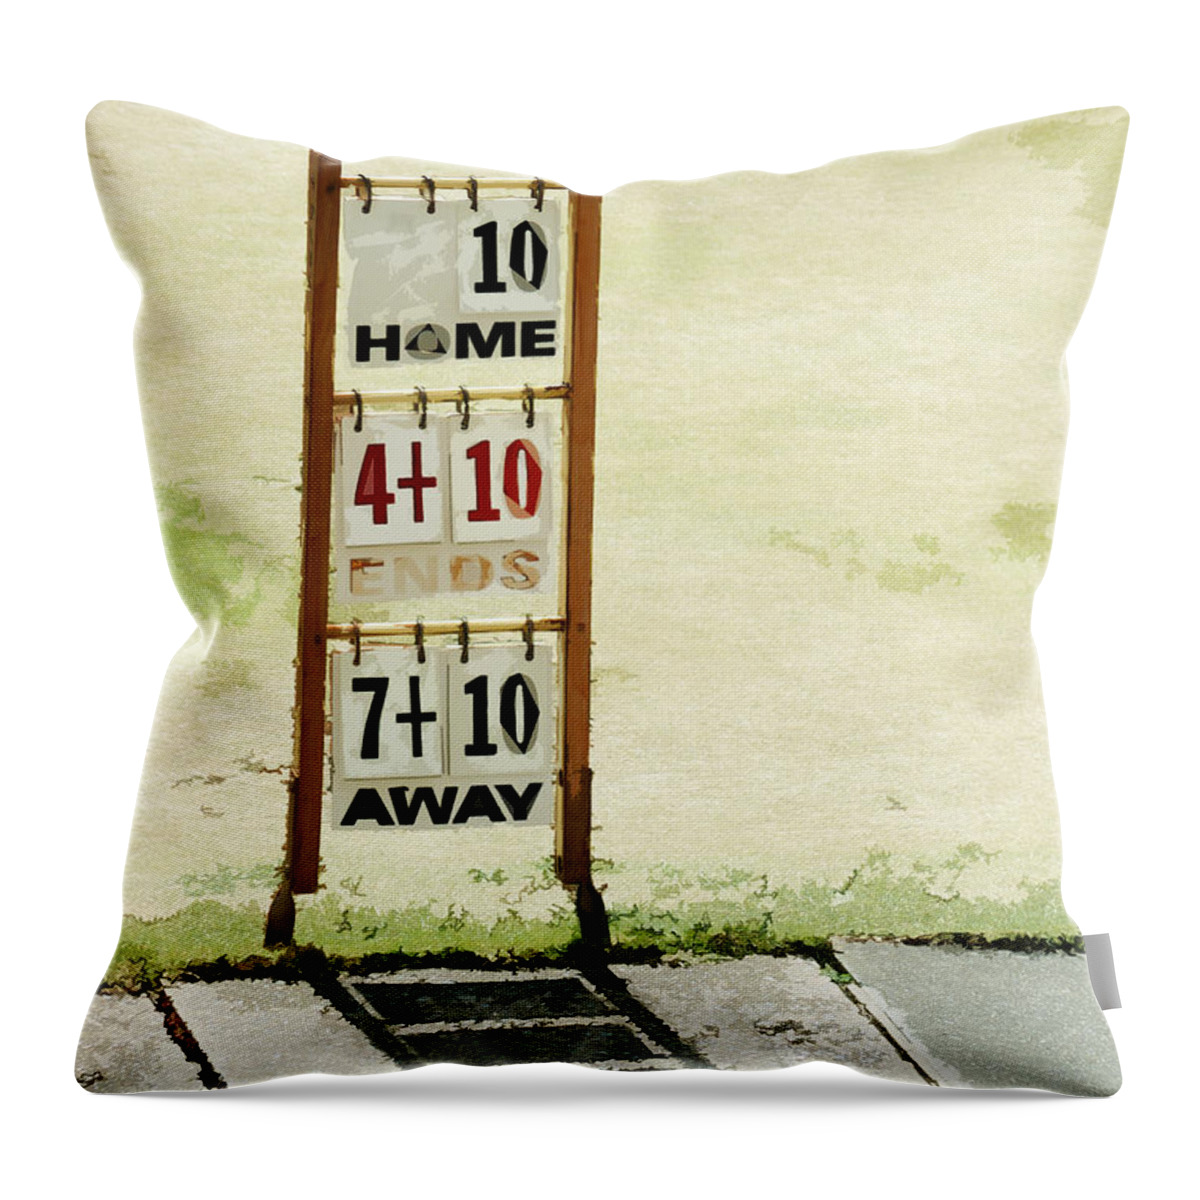 Bowls Throw Pillow featuring the photograph The Score Board by Steve Taylor